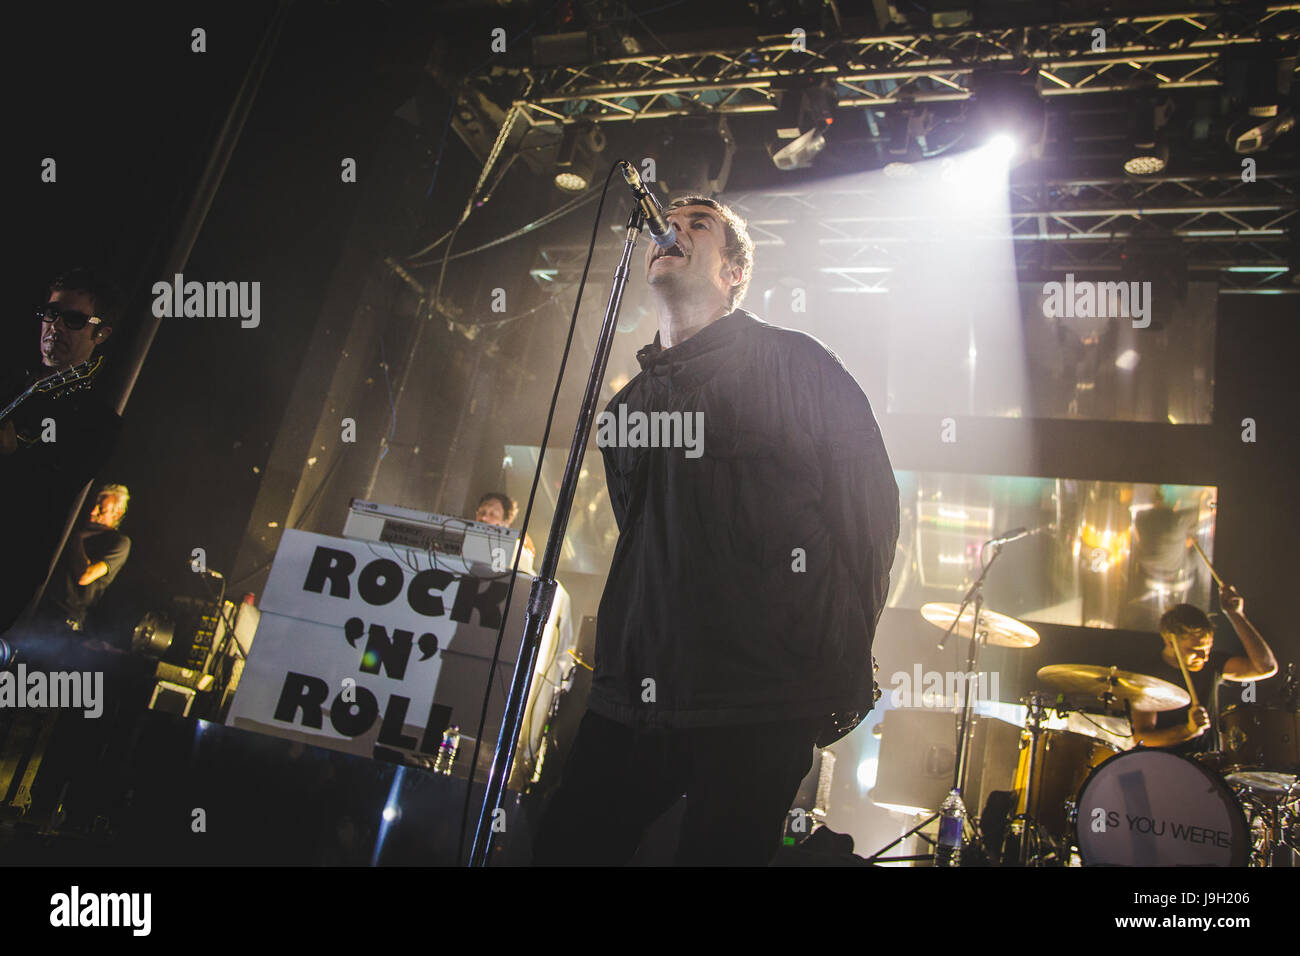 London, UK. 1st June, 2017. Former Oasis singer and frontman, Liam Gallagher, performs a sold out show at the Electric Brixton in London, 2017, after the release of his debut single 'Wall Of Glass' Credit: Myles Wright/ZUMA Wire/Alamy Live News Stock Photo